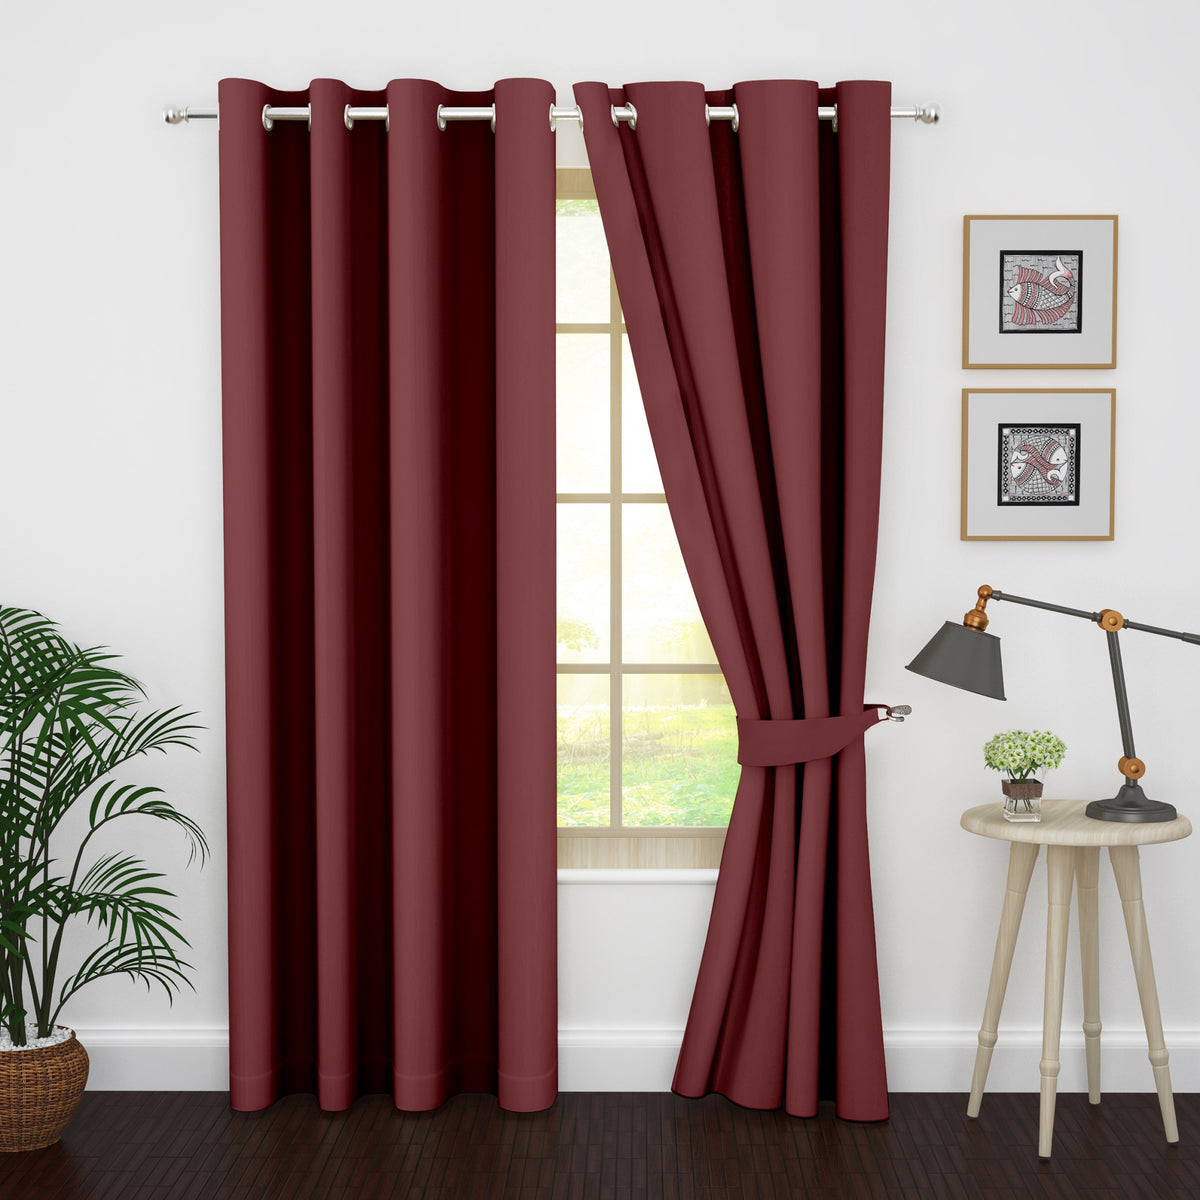 Blackout Curtains - Pack of 2